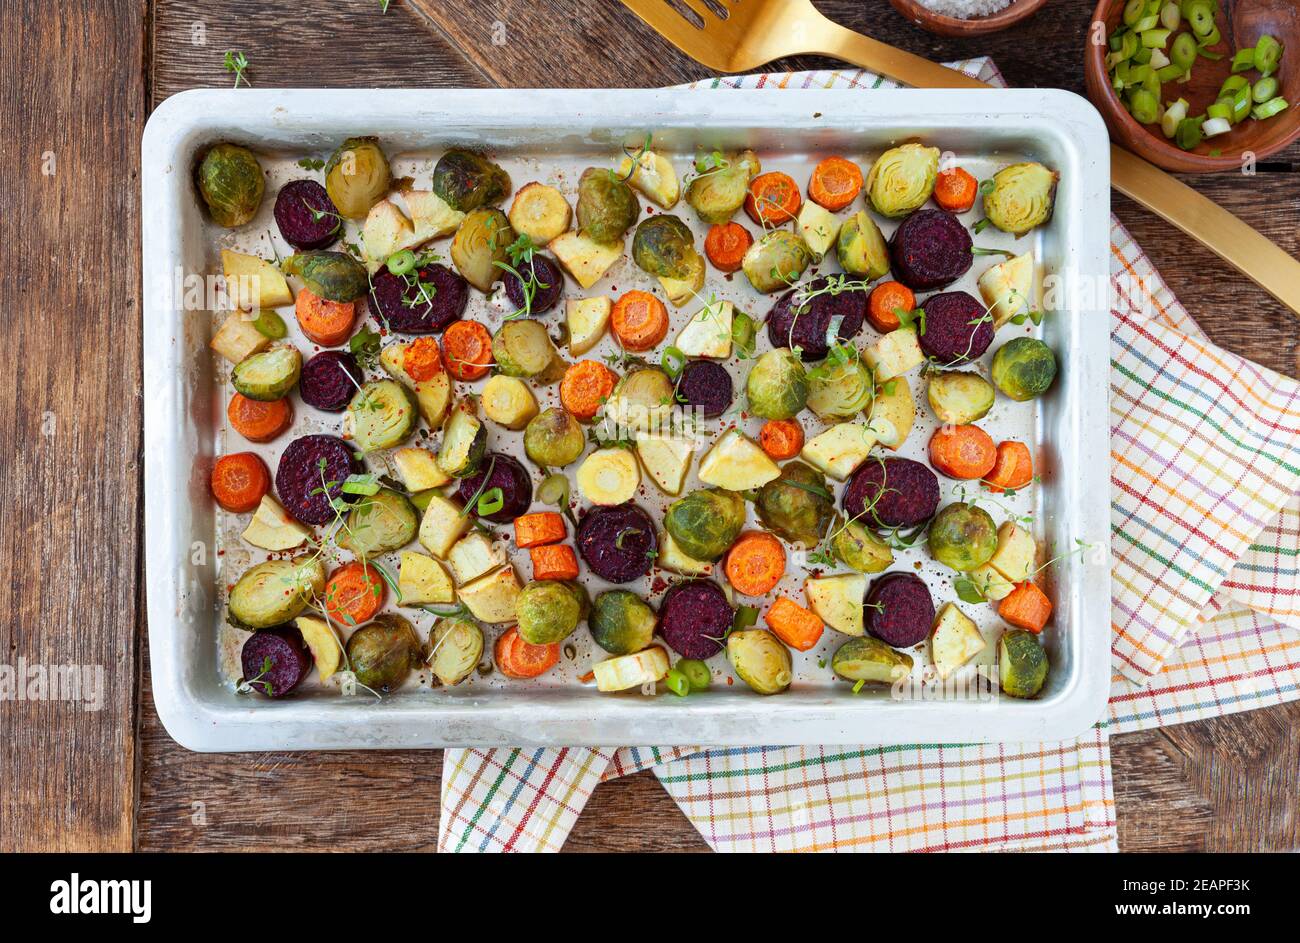 Roasted winter vegetables Stock Photo